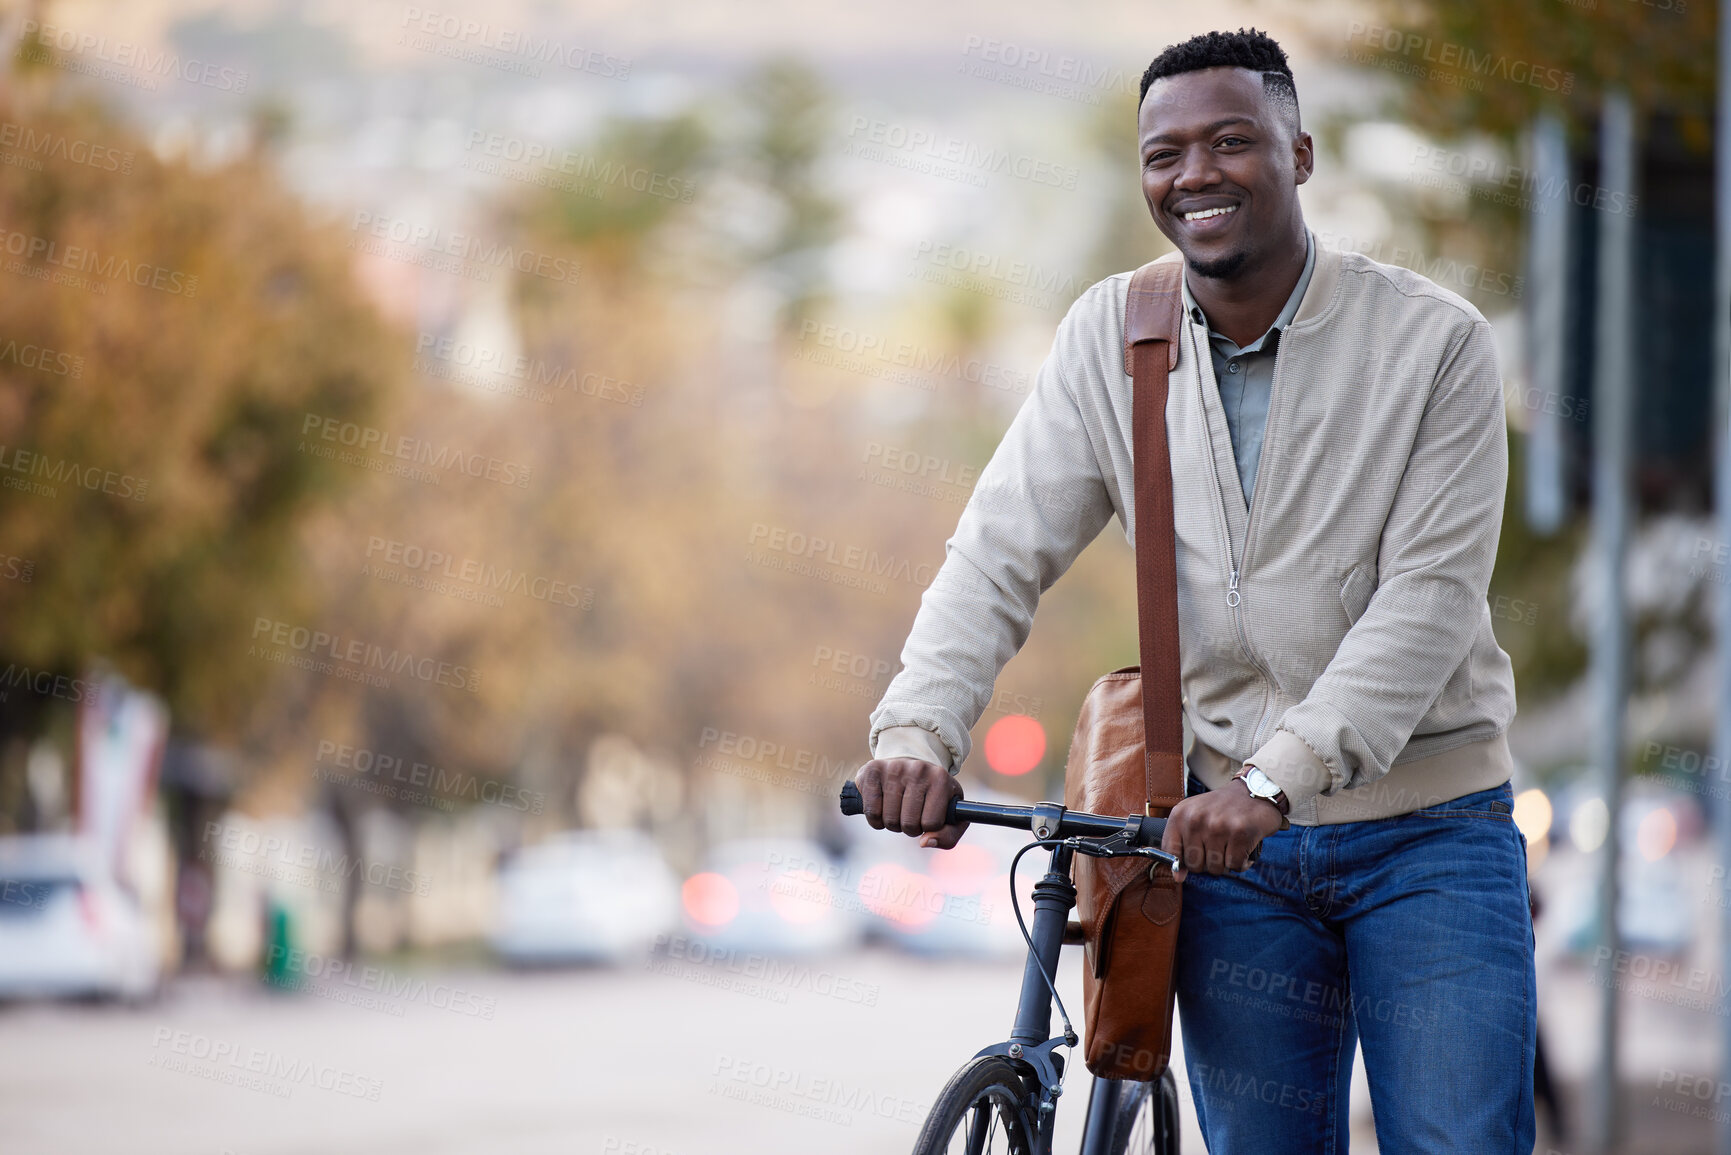 Buy stock photo Happy, businessman and bike for eco friendly transportation and commute to work in the city. Black man, bicycle and leather bag for sustainable travel with carbon neutral alternative on urban street